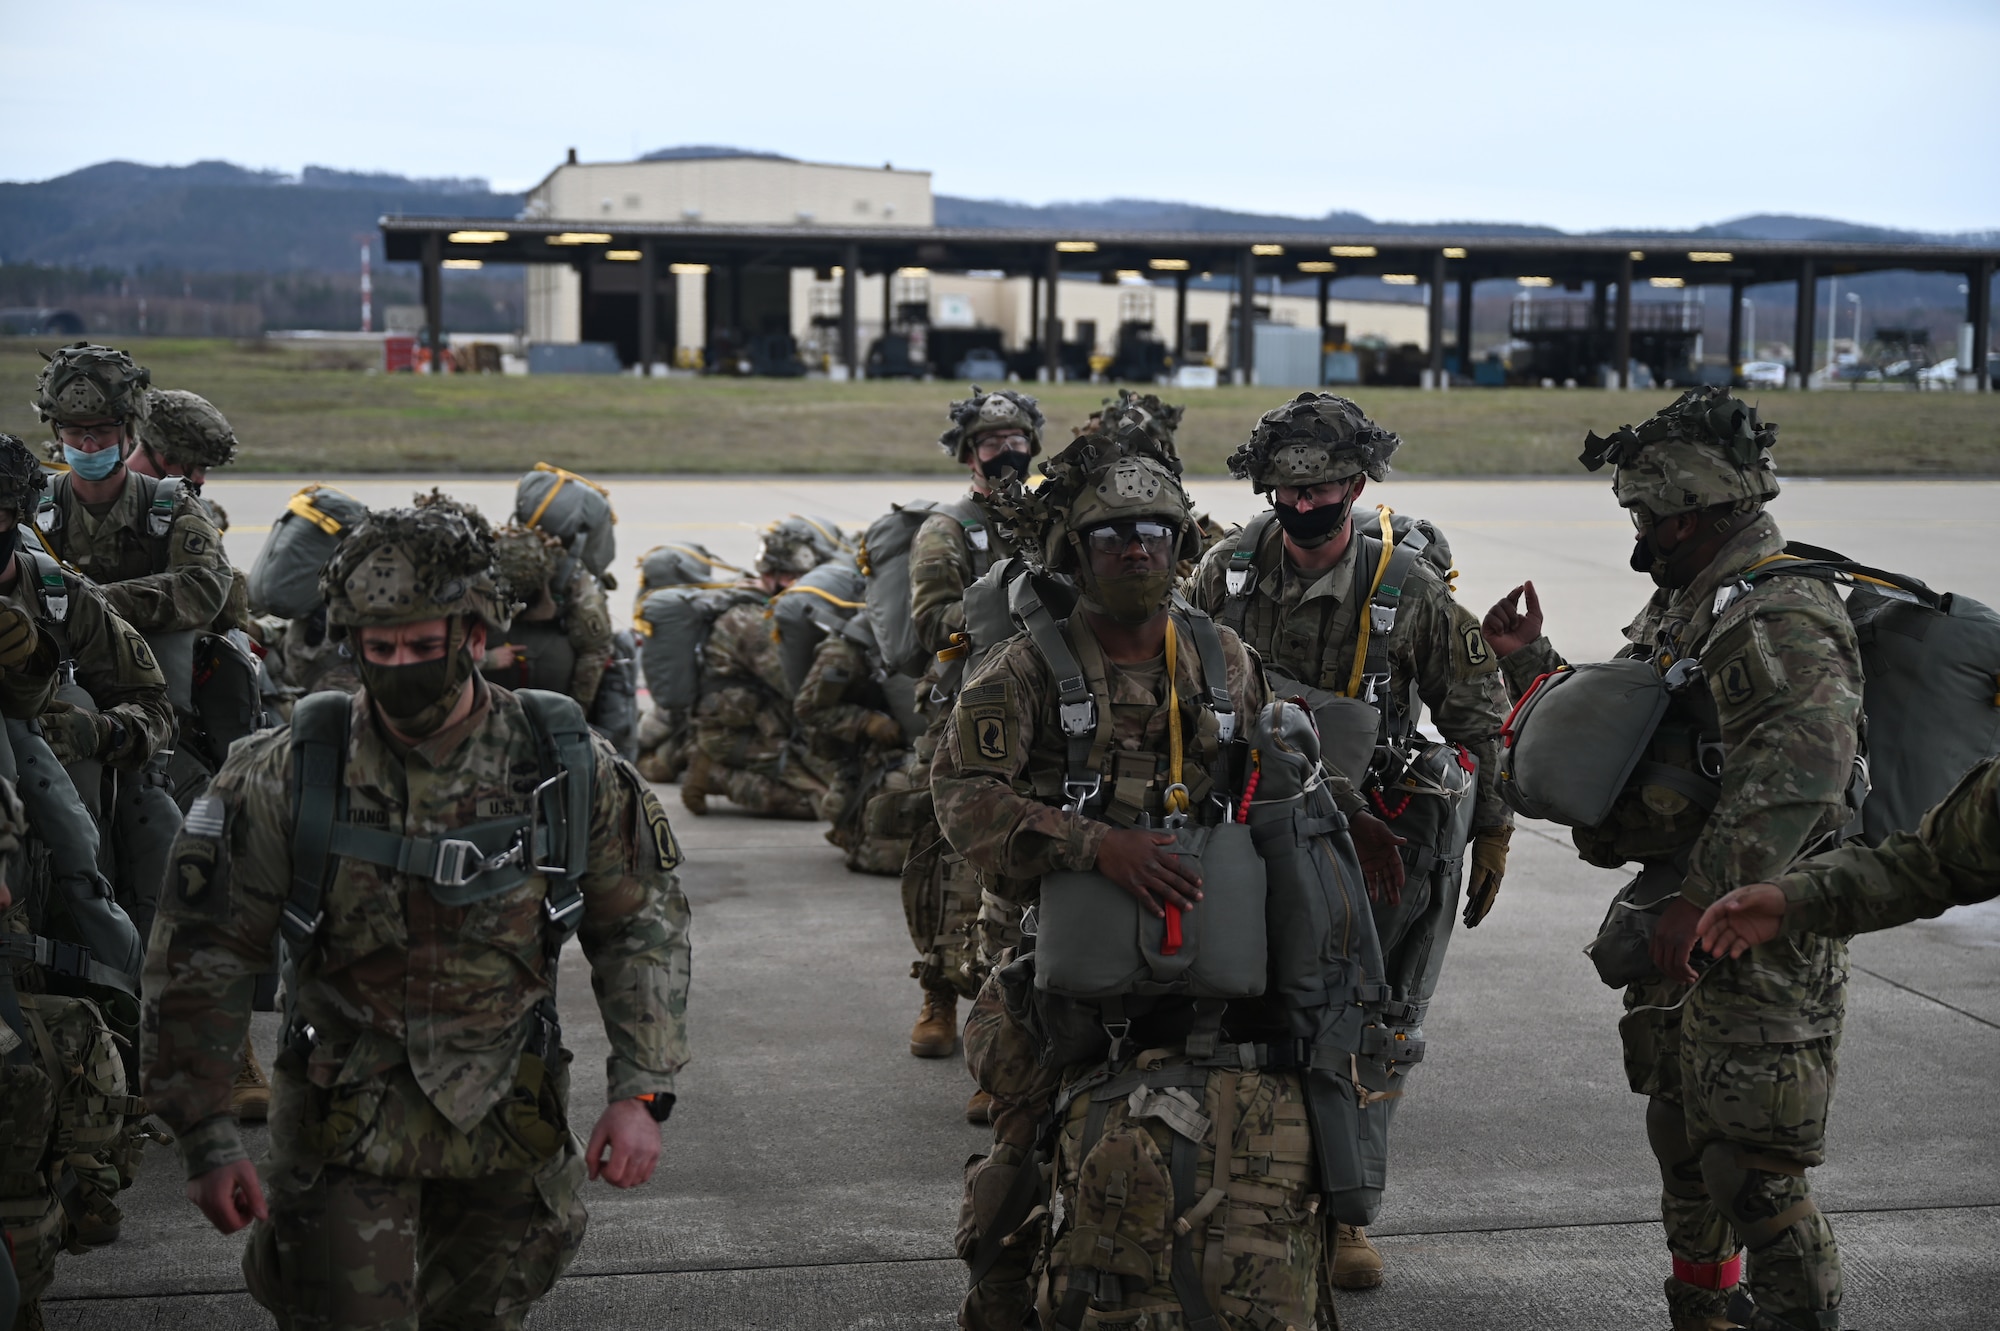 U.S. Army paratroopers assigned to the 1st Squadron (Airborne), 91st Cavalry Regiment, 173rd Airborne Brigade, assigned to Grafenwoehr Training Area, Germany, prepare to board a C-130J Super Hercules aircraft.